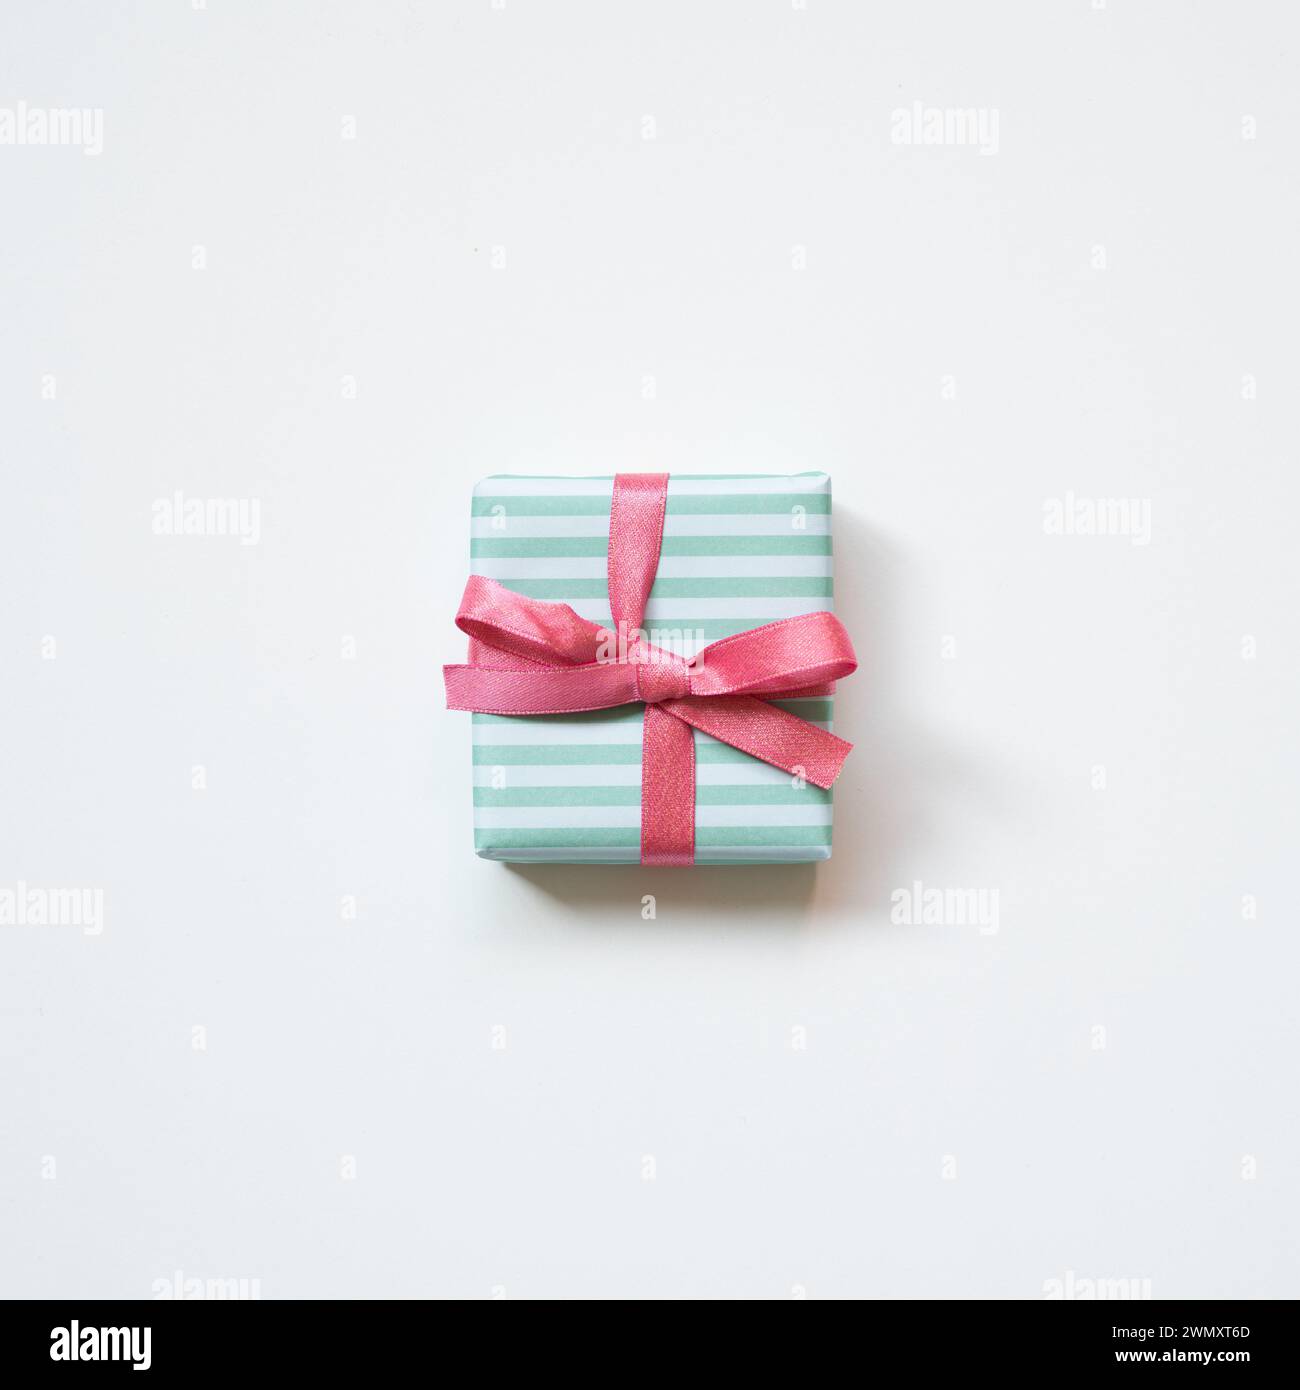 Green stripe pattern gift box isolated on white background. top view Stock Photo